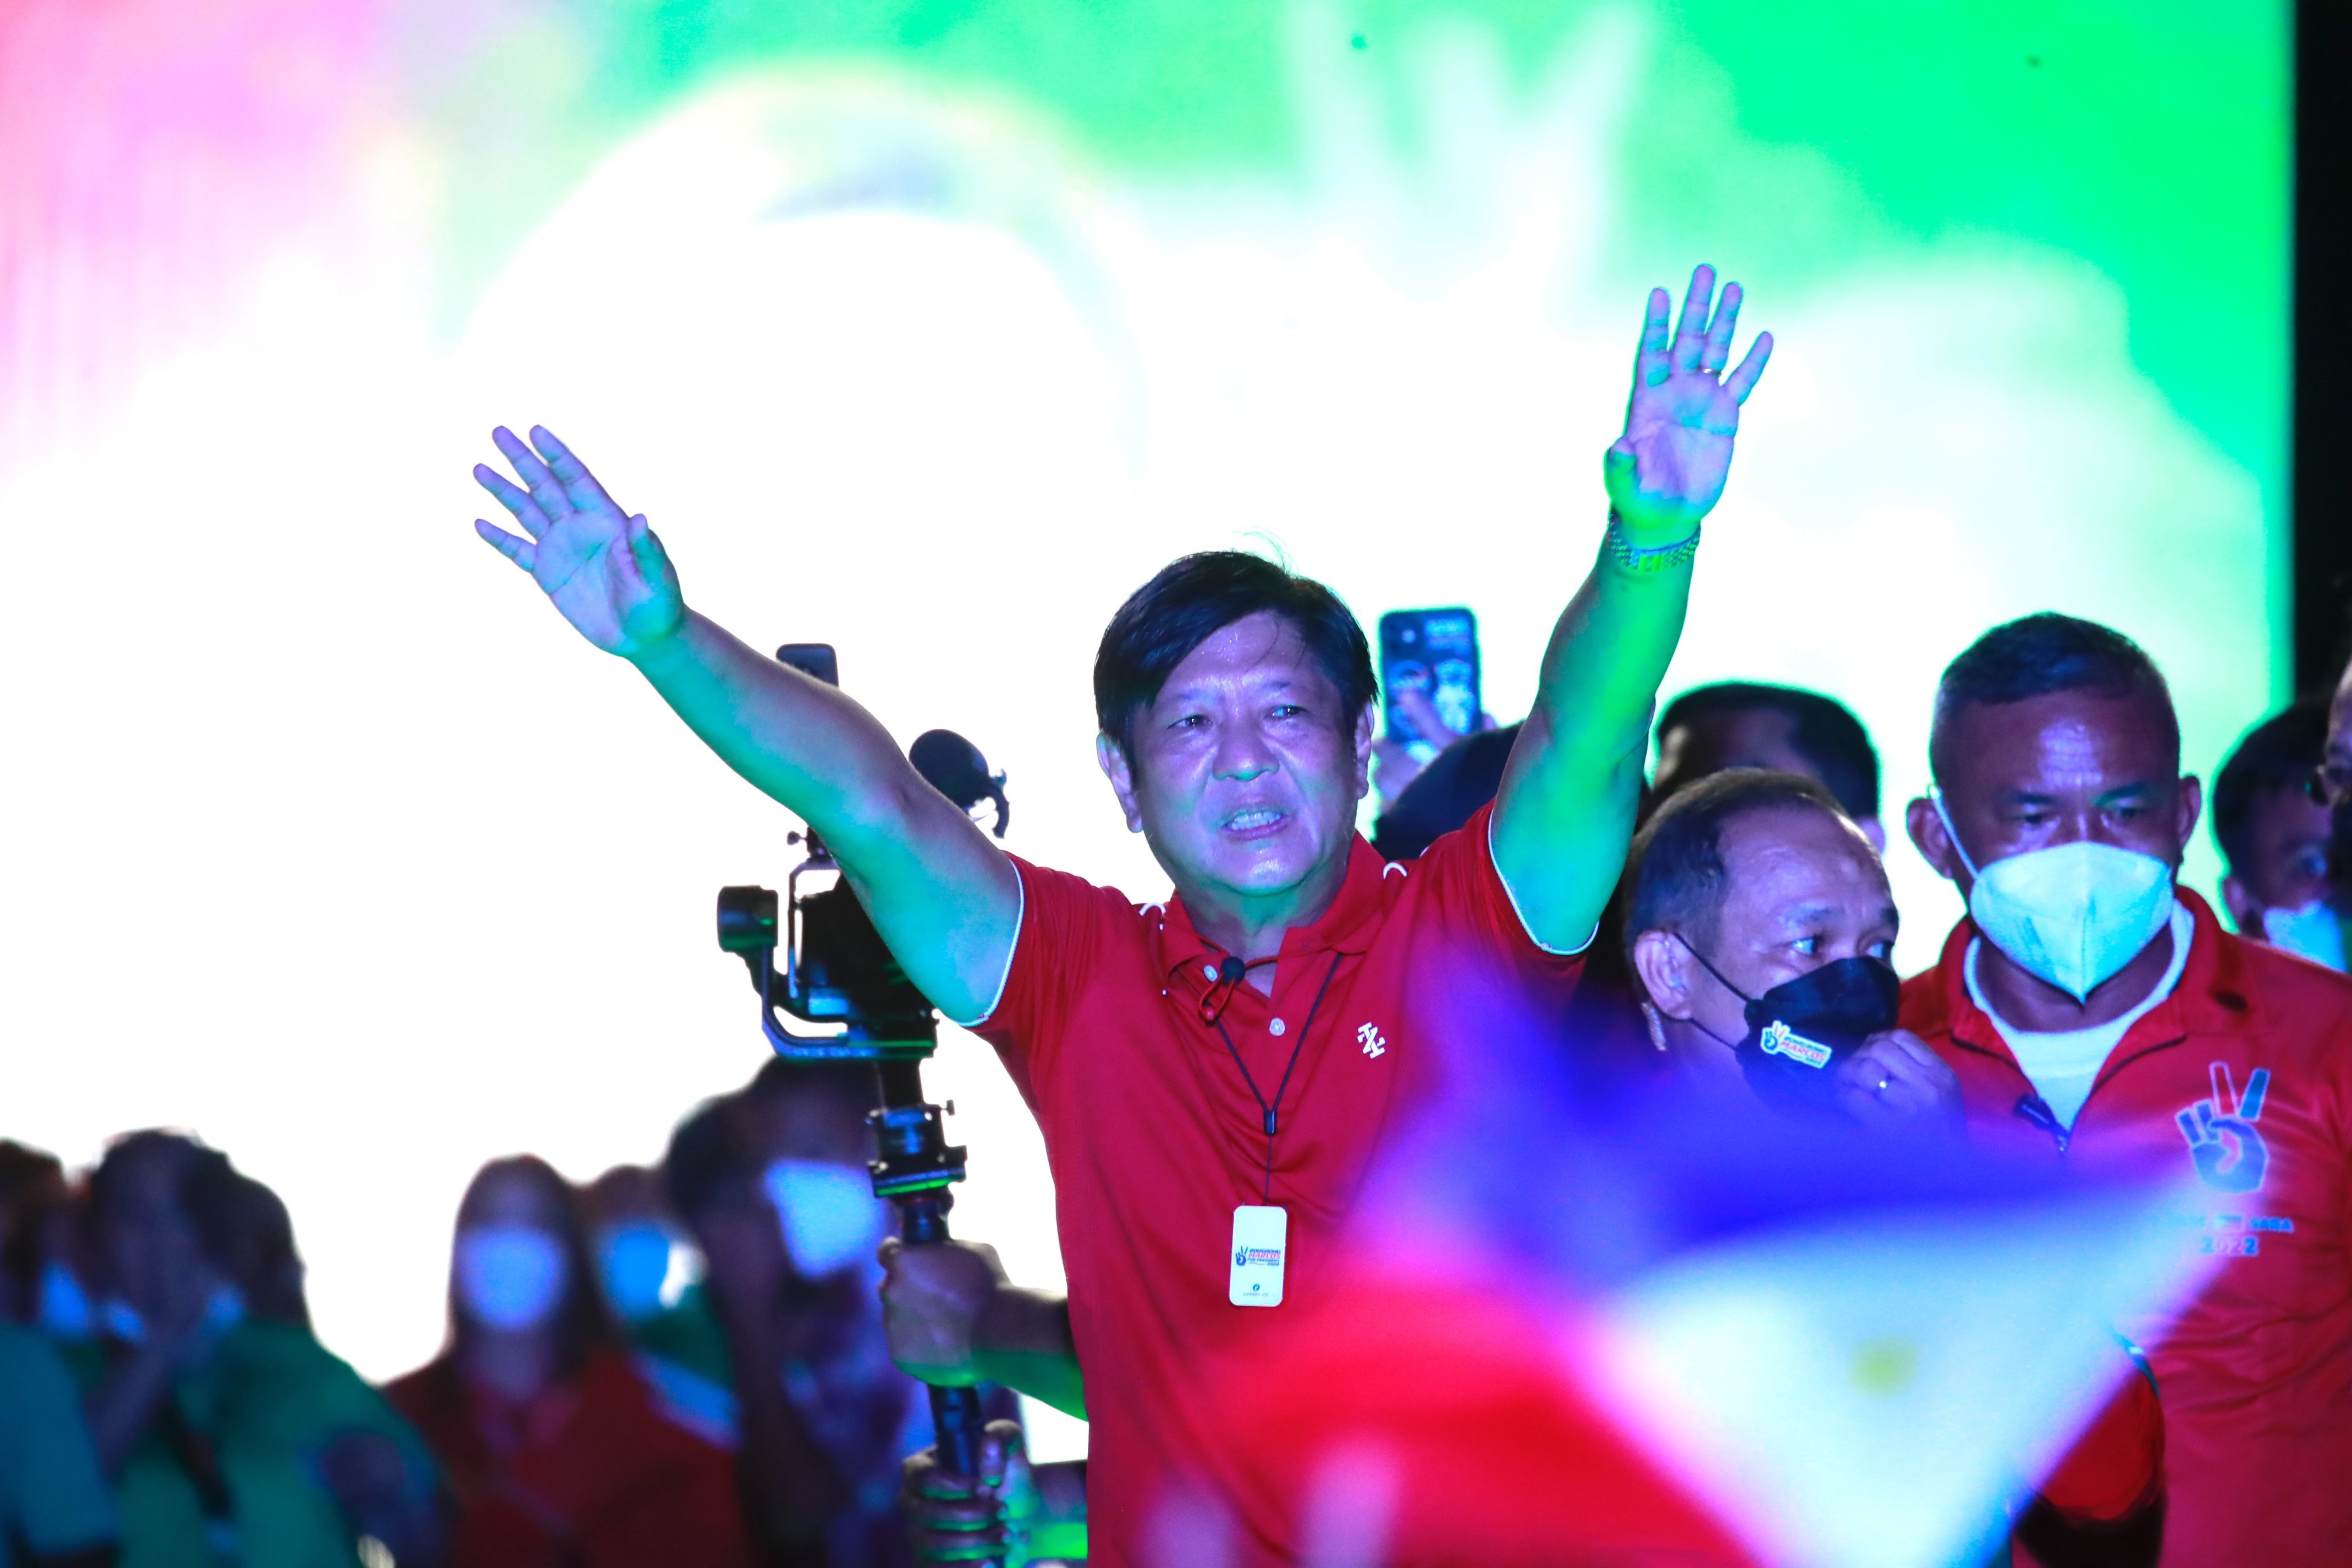 Bongbong Marcos attended Oxford University and the Wharton Business School, but did not graduate from both. Photo: EPA-EFE